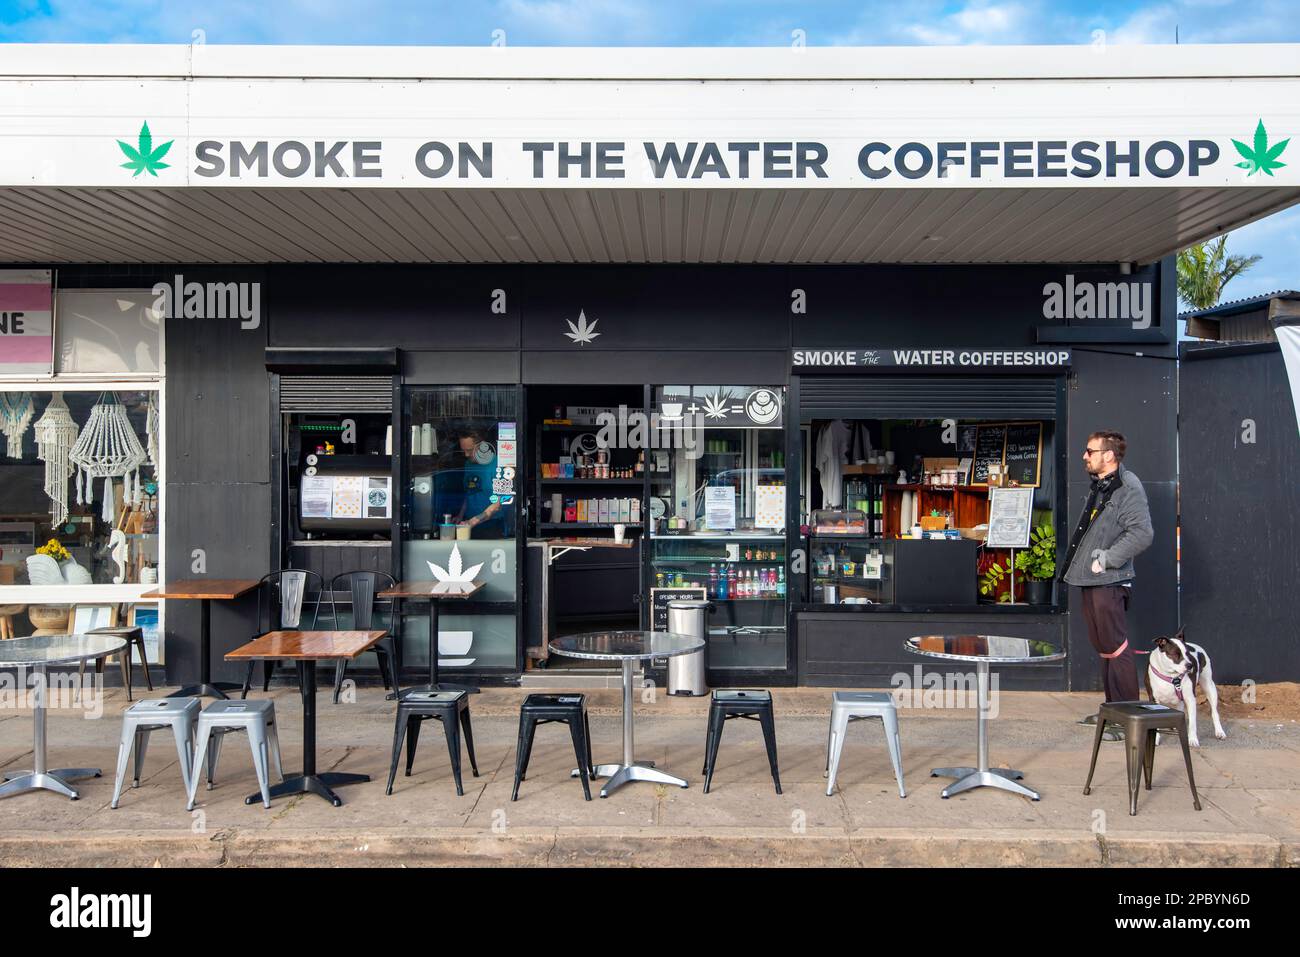 The Smoke on the Water Coffee Shop at Ettalong Beach on the Central Coast of New South Wales, Australia Stock Photo